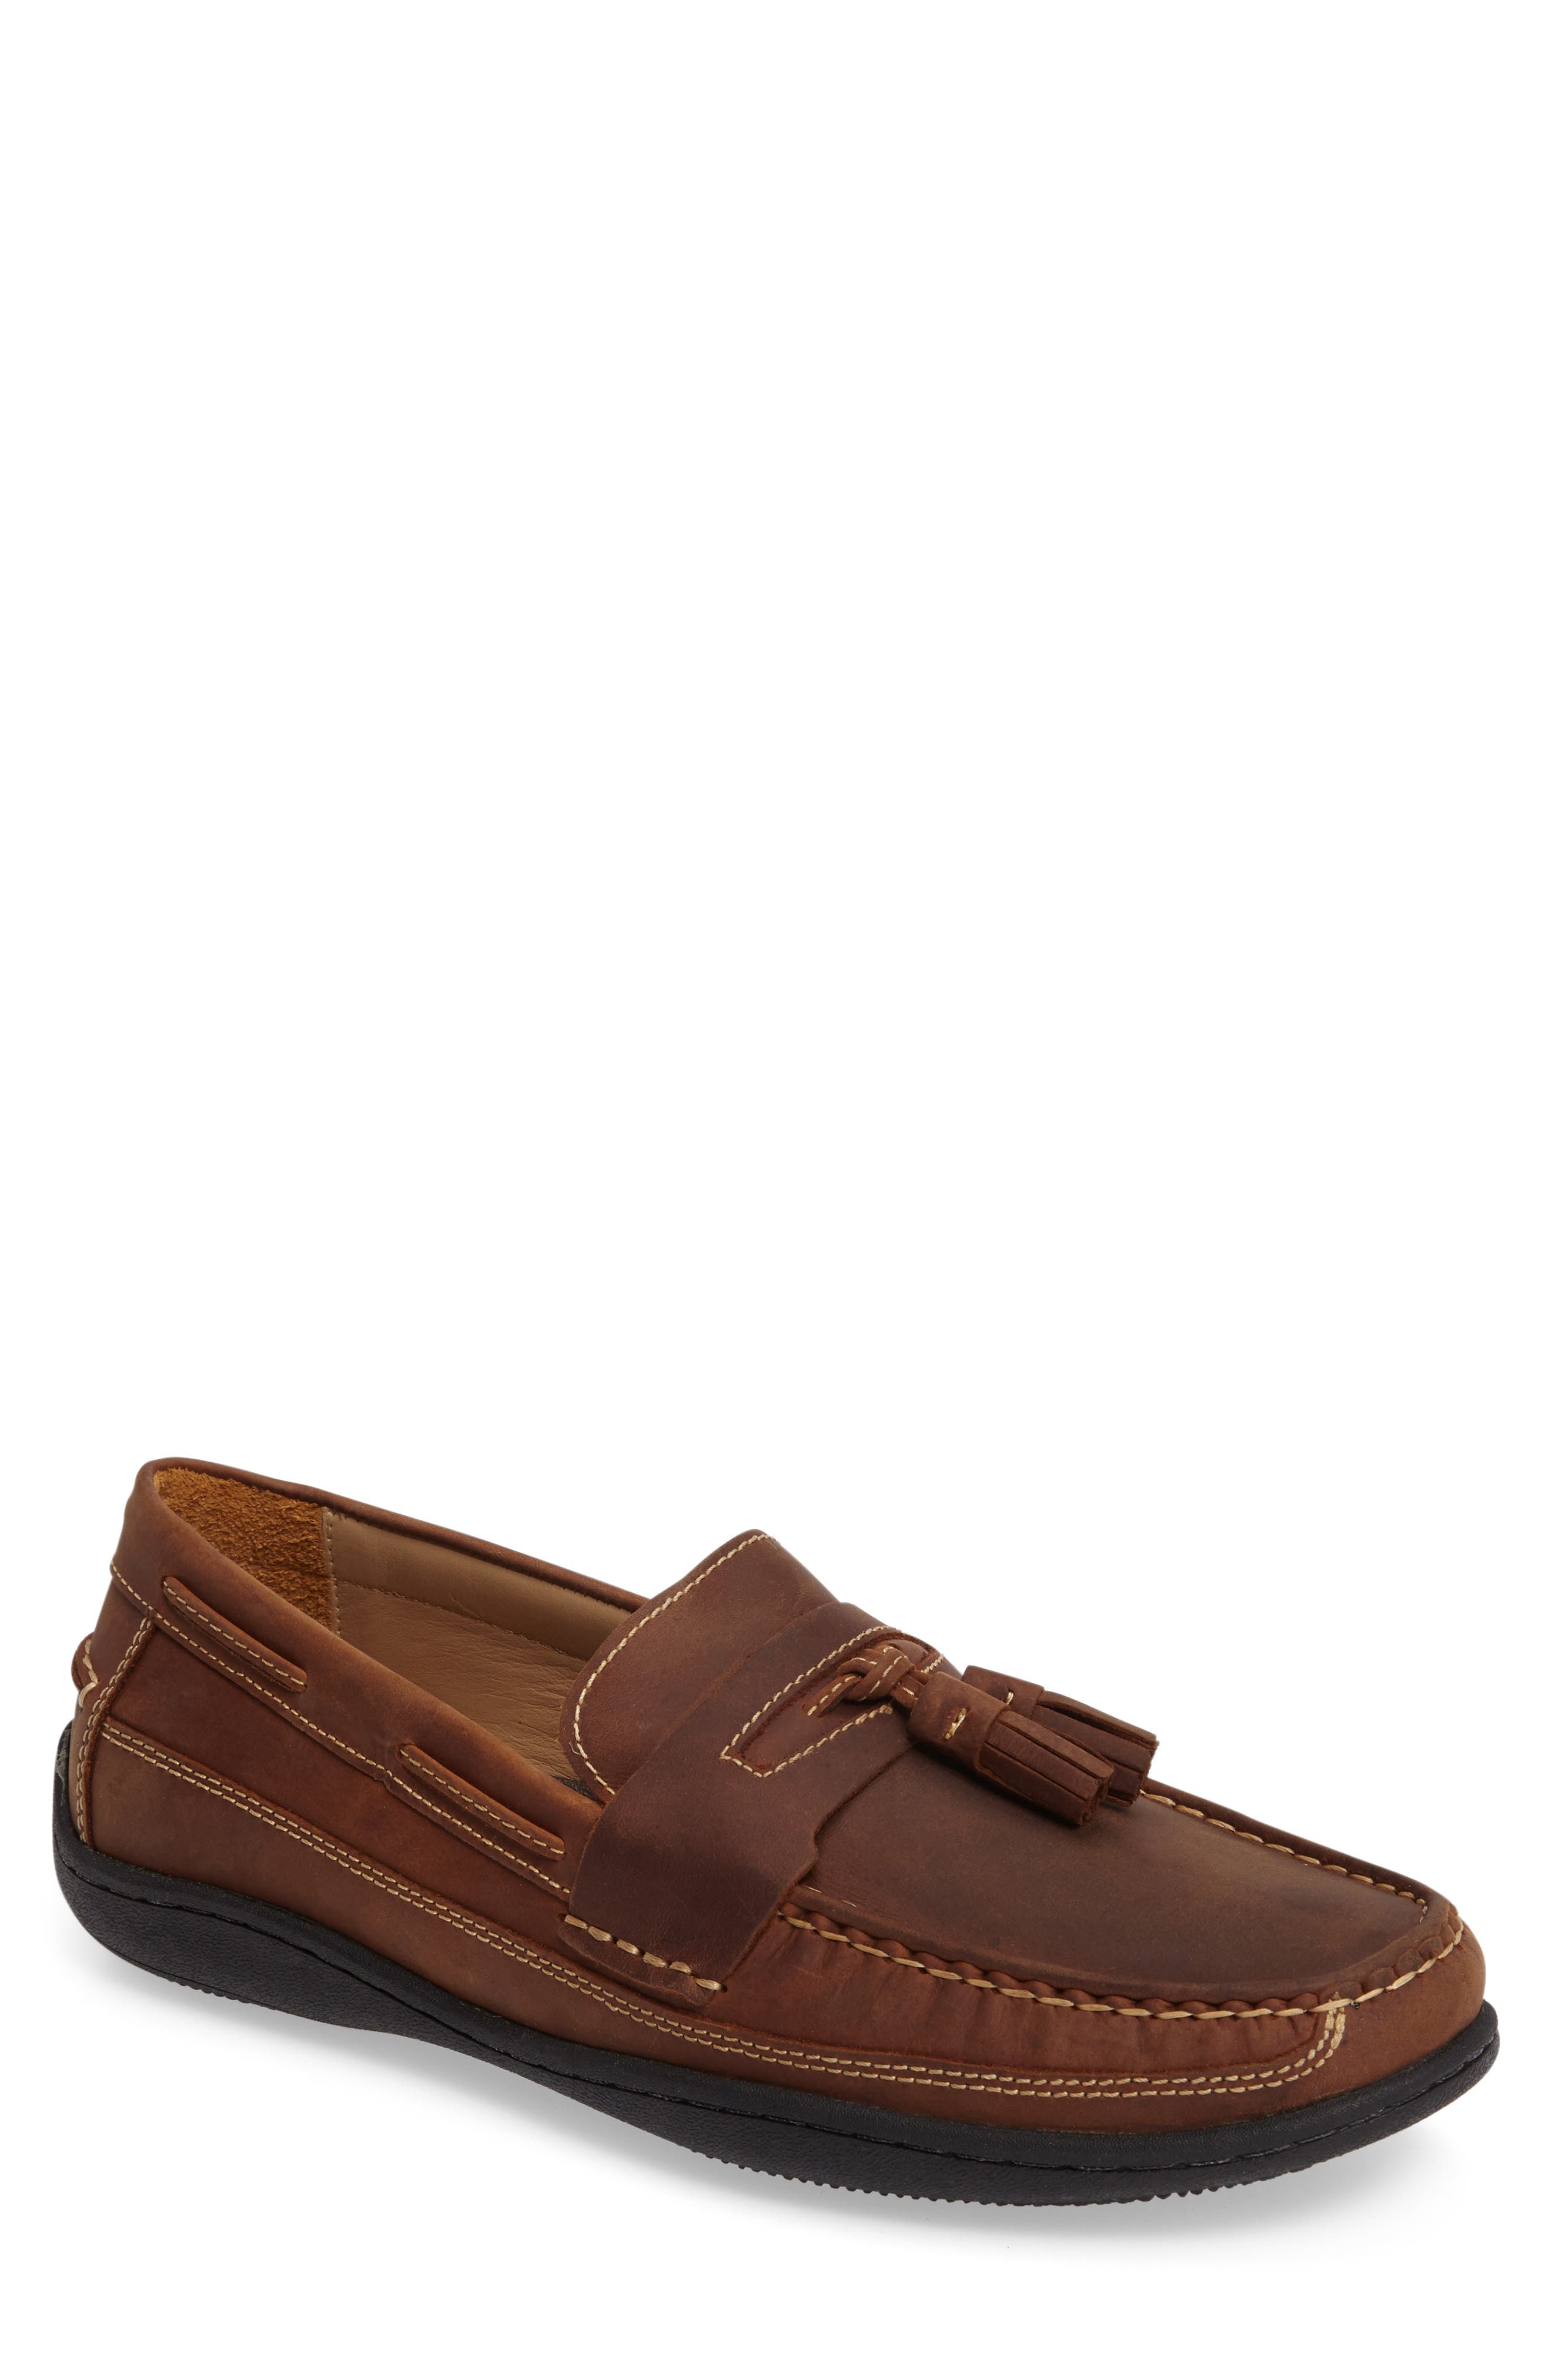 Johnston & Murphy - Men's Casual Fashion Shoes and Sneakers